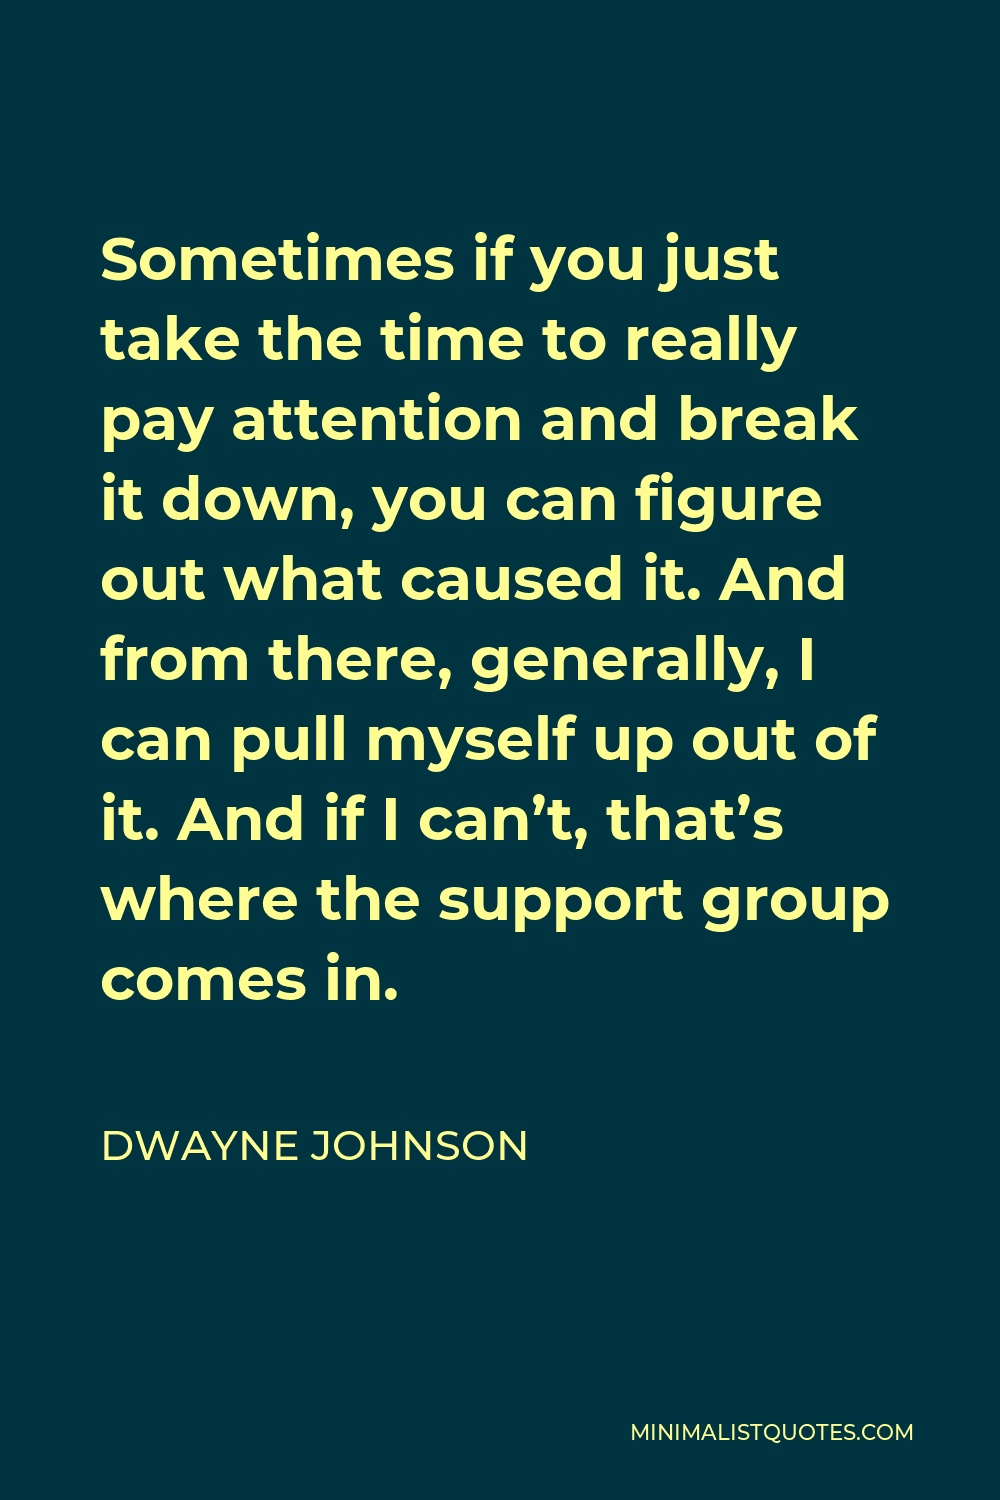 Dwayne Johnson Quote - Sometimes if you just take the time to really pay attention and break it down, you can figure out what caused it. And from there, generally, I can pull myself up out of it. And if I can’t, that’s where the support group comes in.